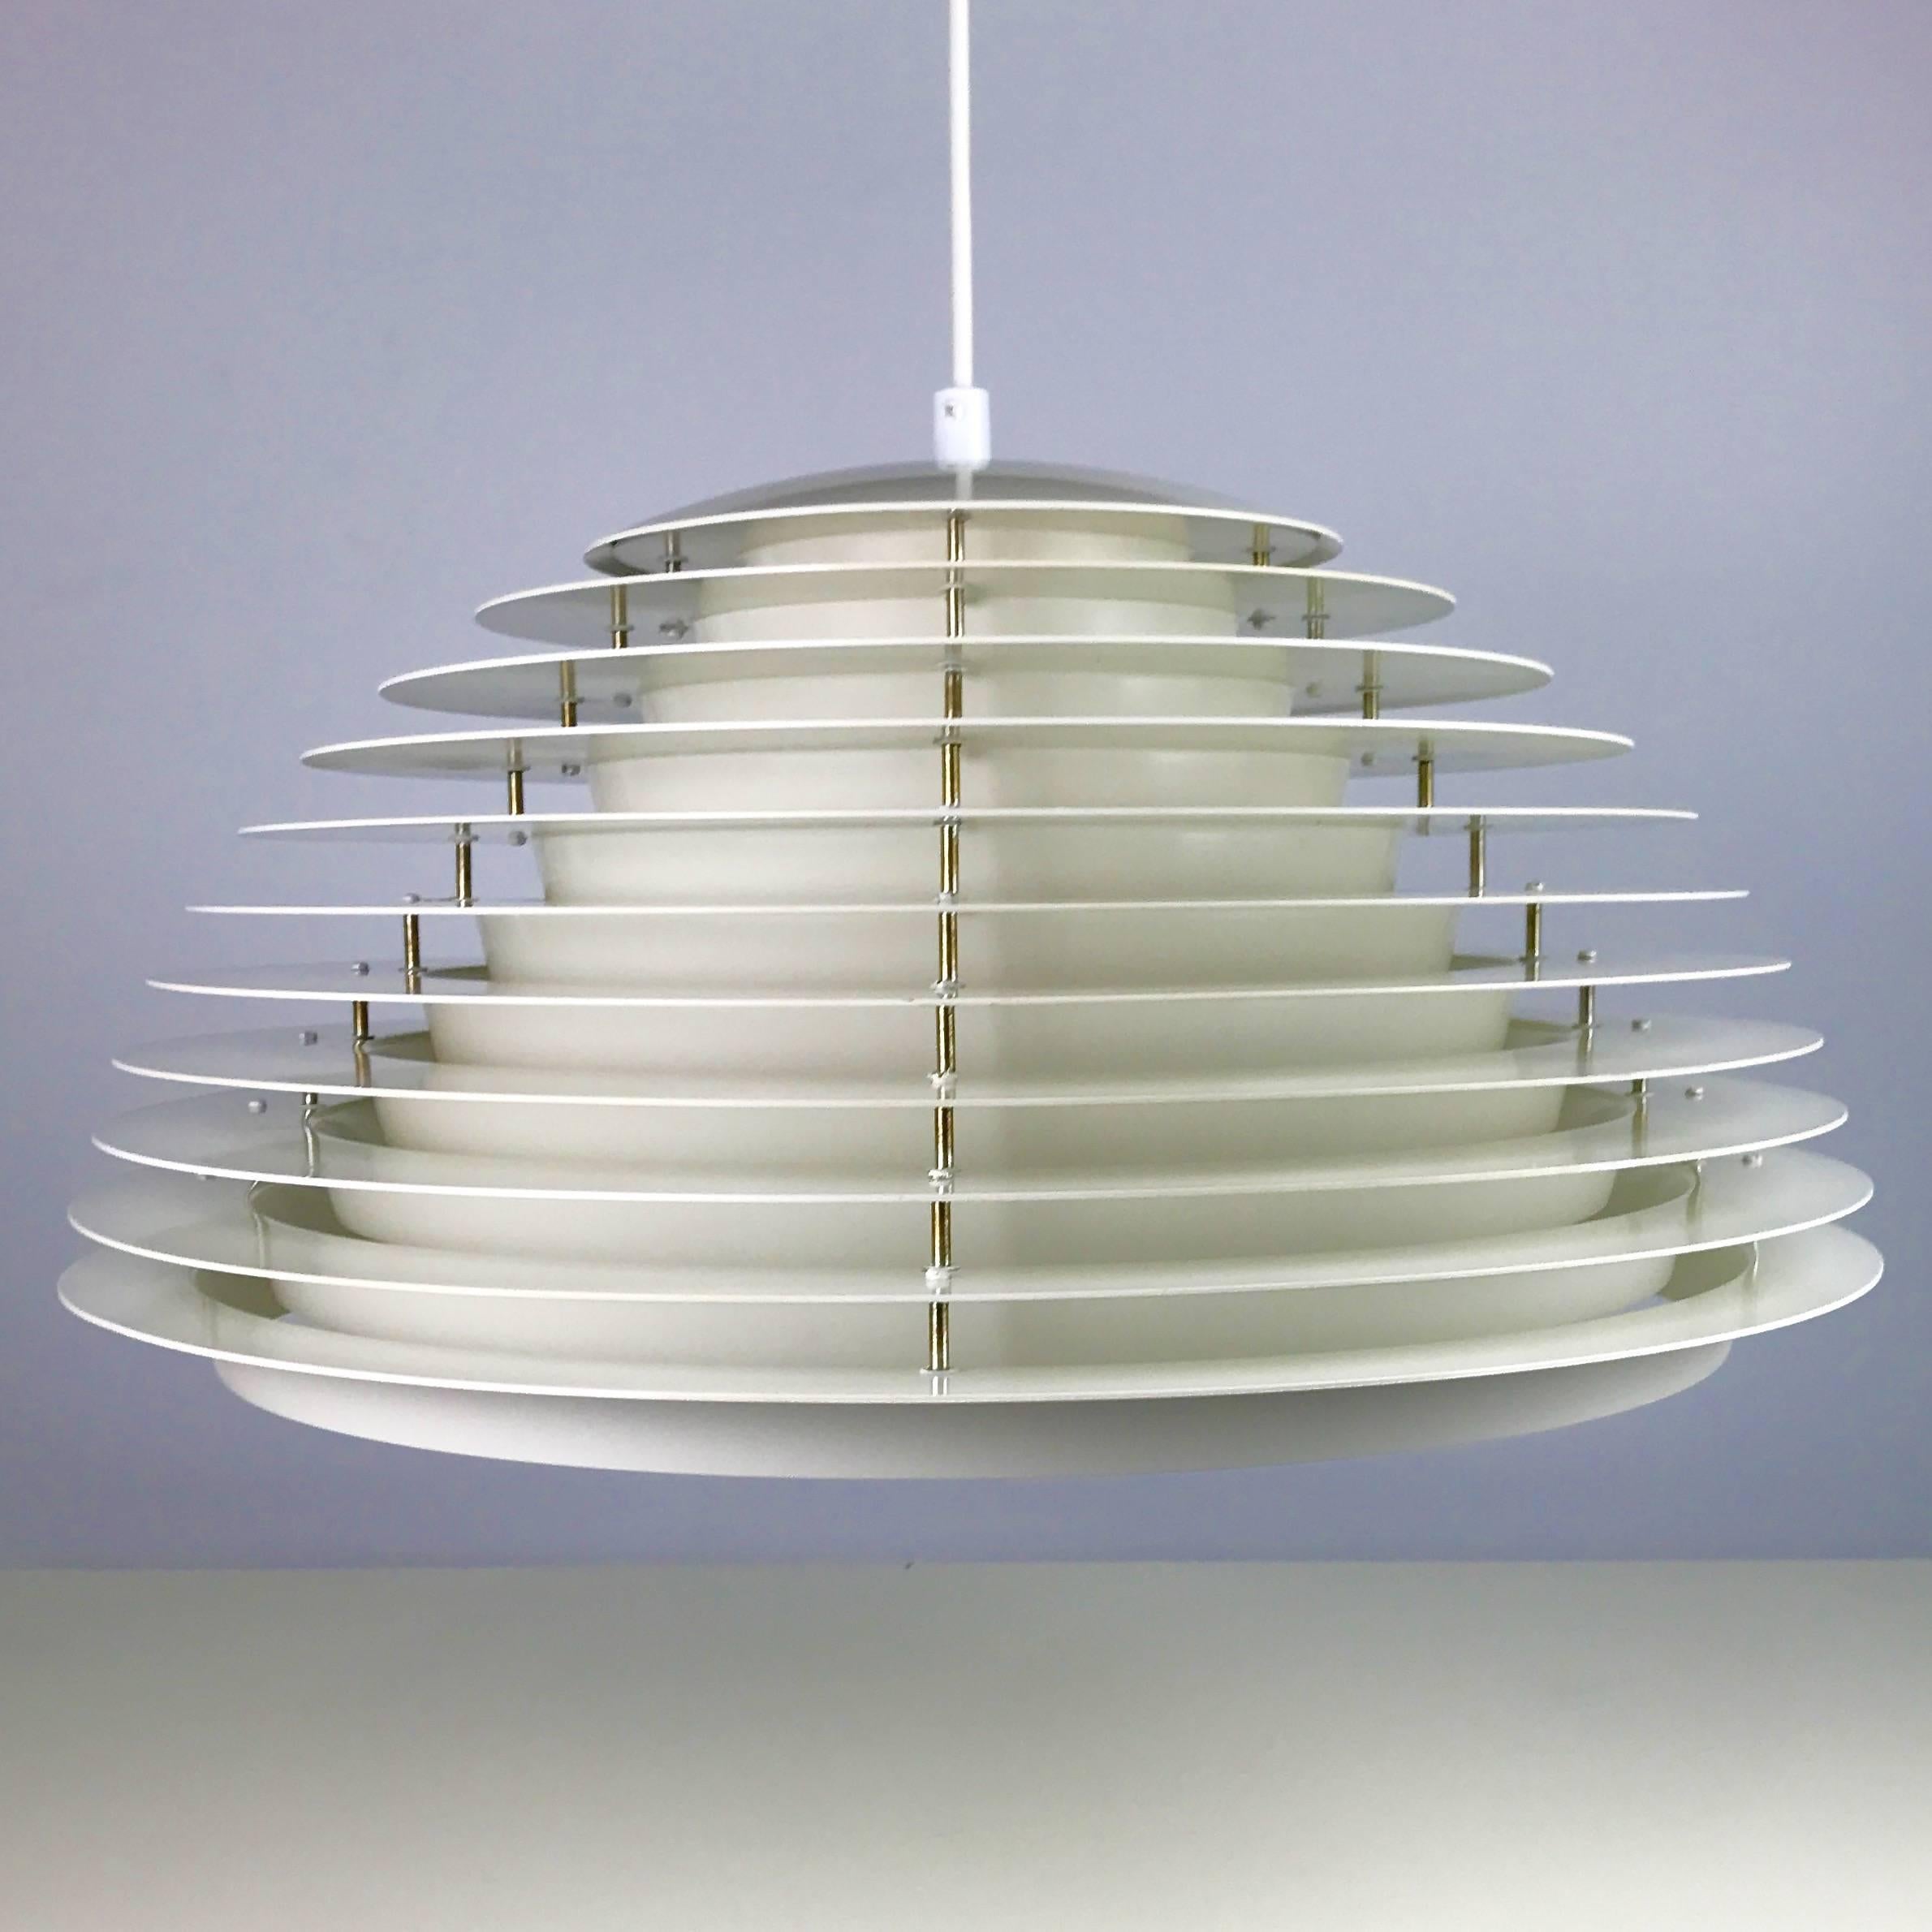 When you combine magnificent craftsmanship and brilliant design you might end up with something like this beauty, the impressive Hekla.

The light consists of ten white lacquered shades with a curved white lacquered lid on top. The light is heavy